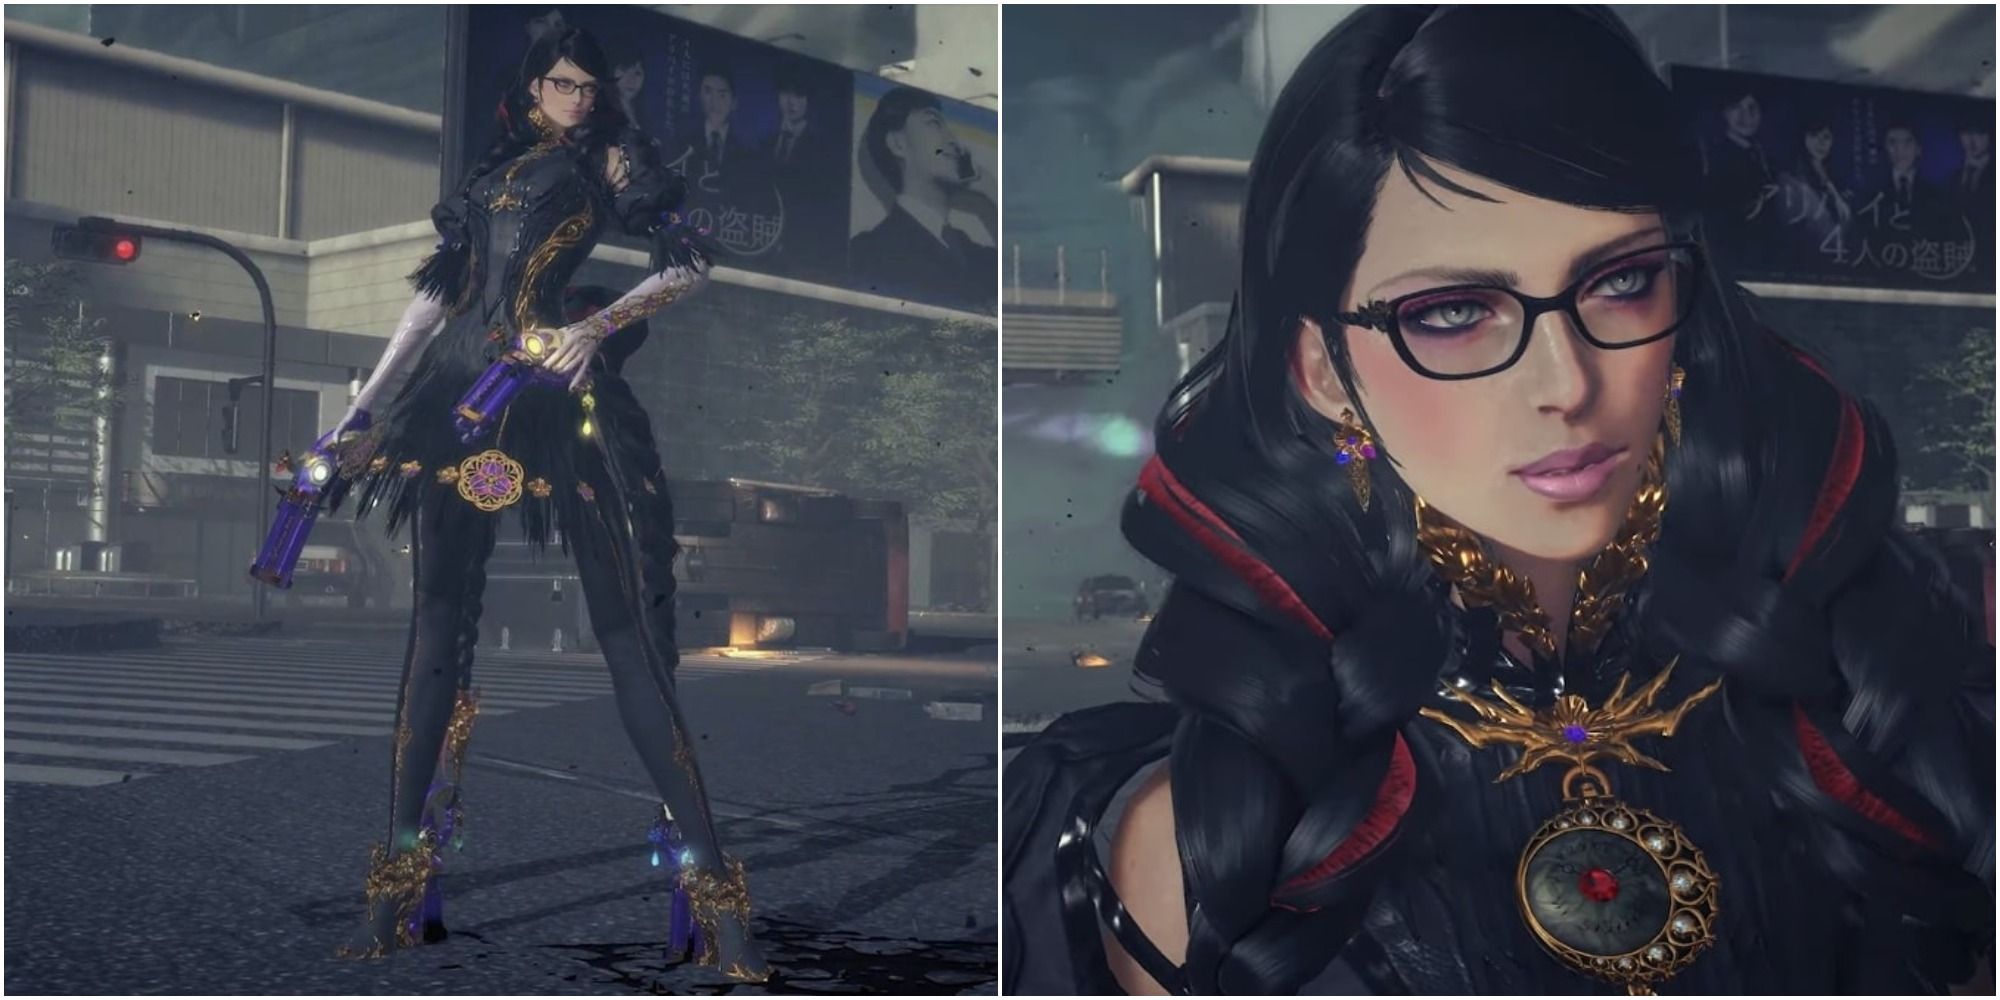 Bayonetta 3 outfit full body (left) and close up (right) from 2021 trailer